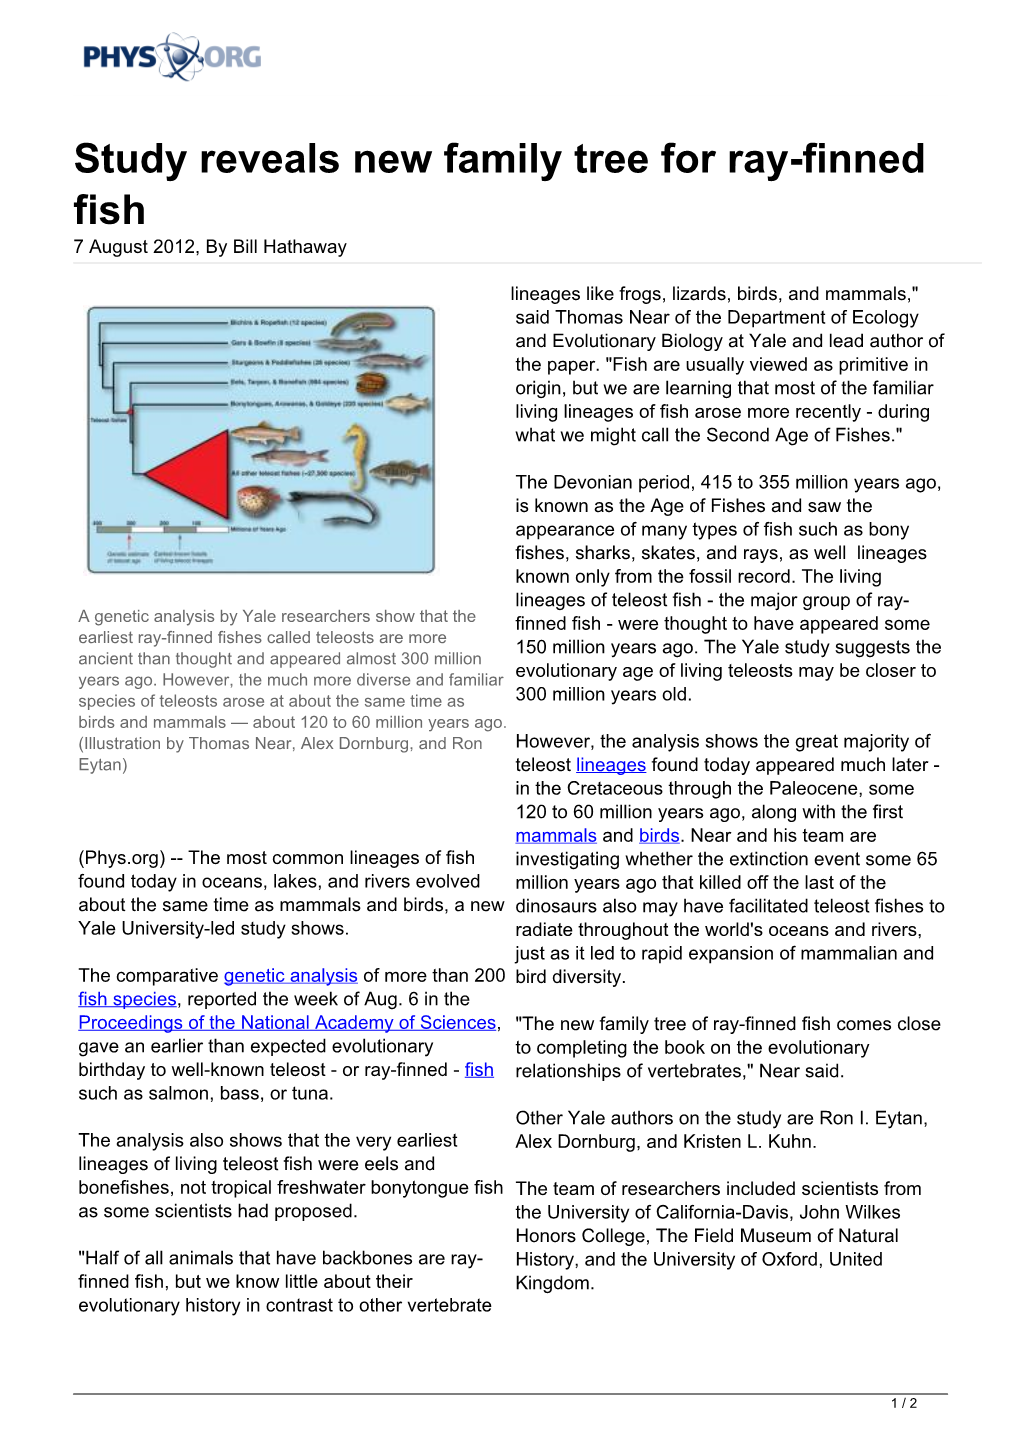 Study Reveals New Family Tree for Ray-Finned Fish 7 August 2012, by Bill Hathaway